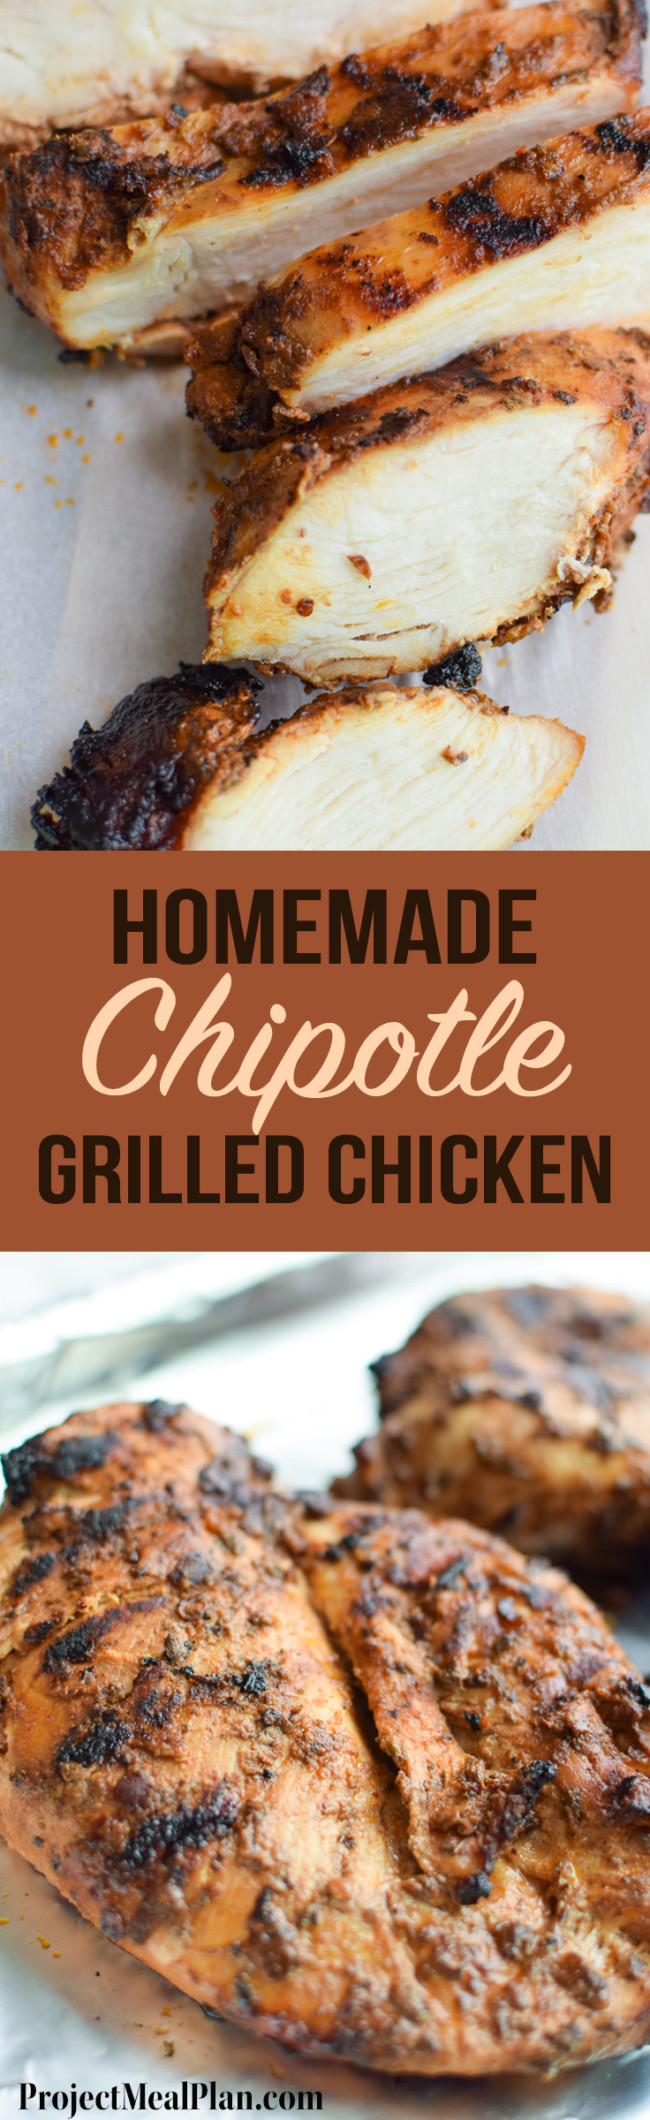 Homemade Chipotle Grilled Chicken - Project Meal Plan